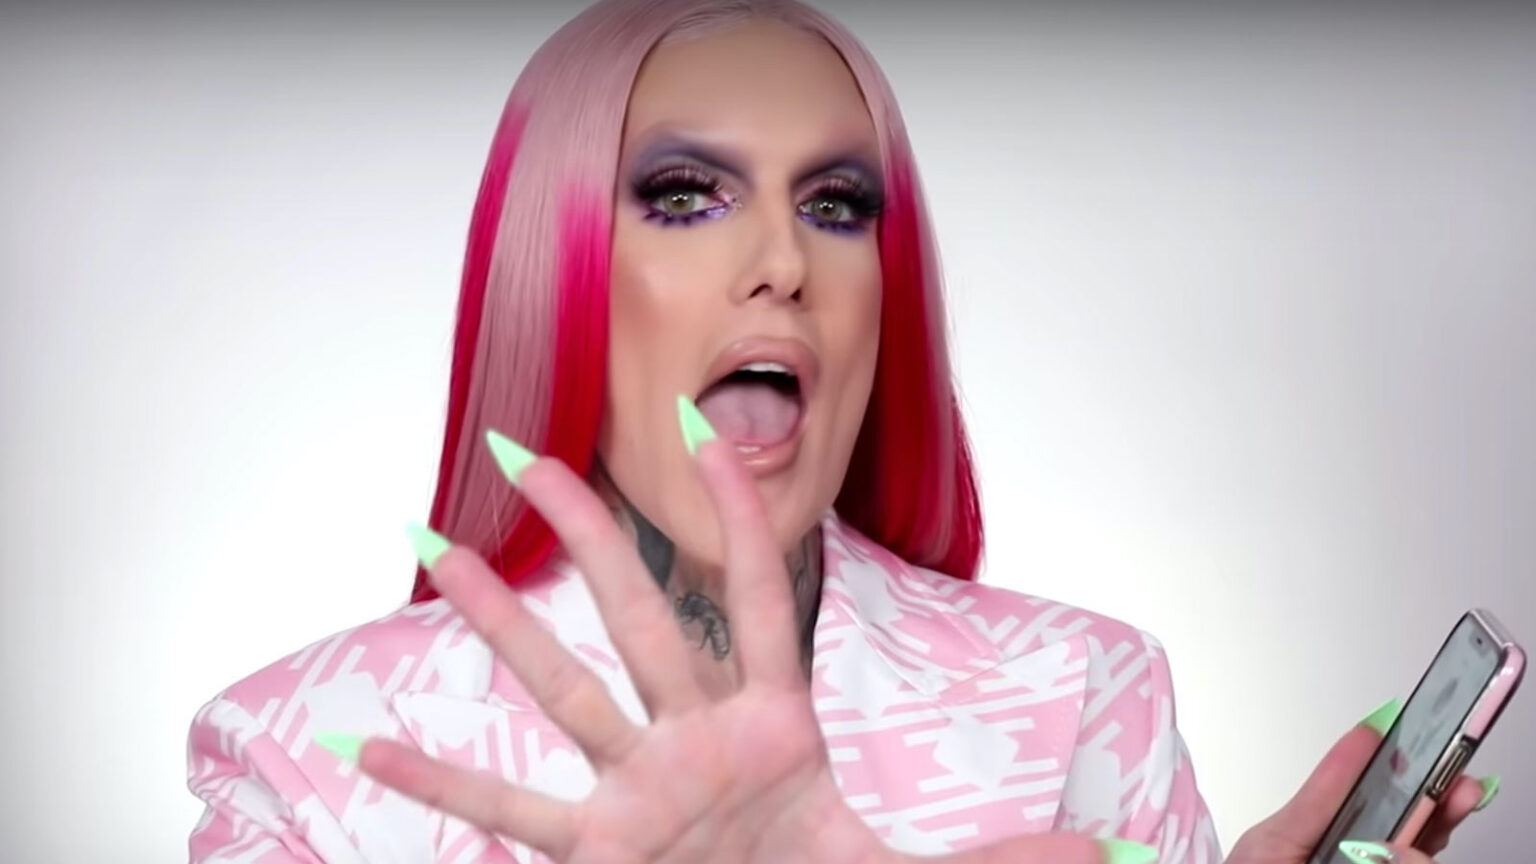 After being silent for almost a month, Jeffree Star is back on YouTube. Here are all the responses to his "apology".